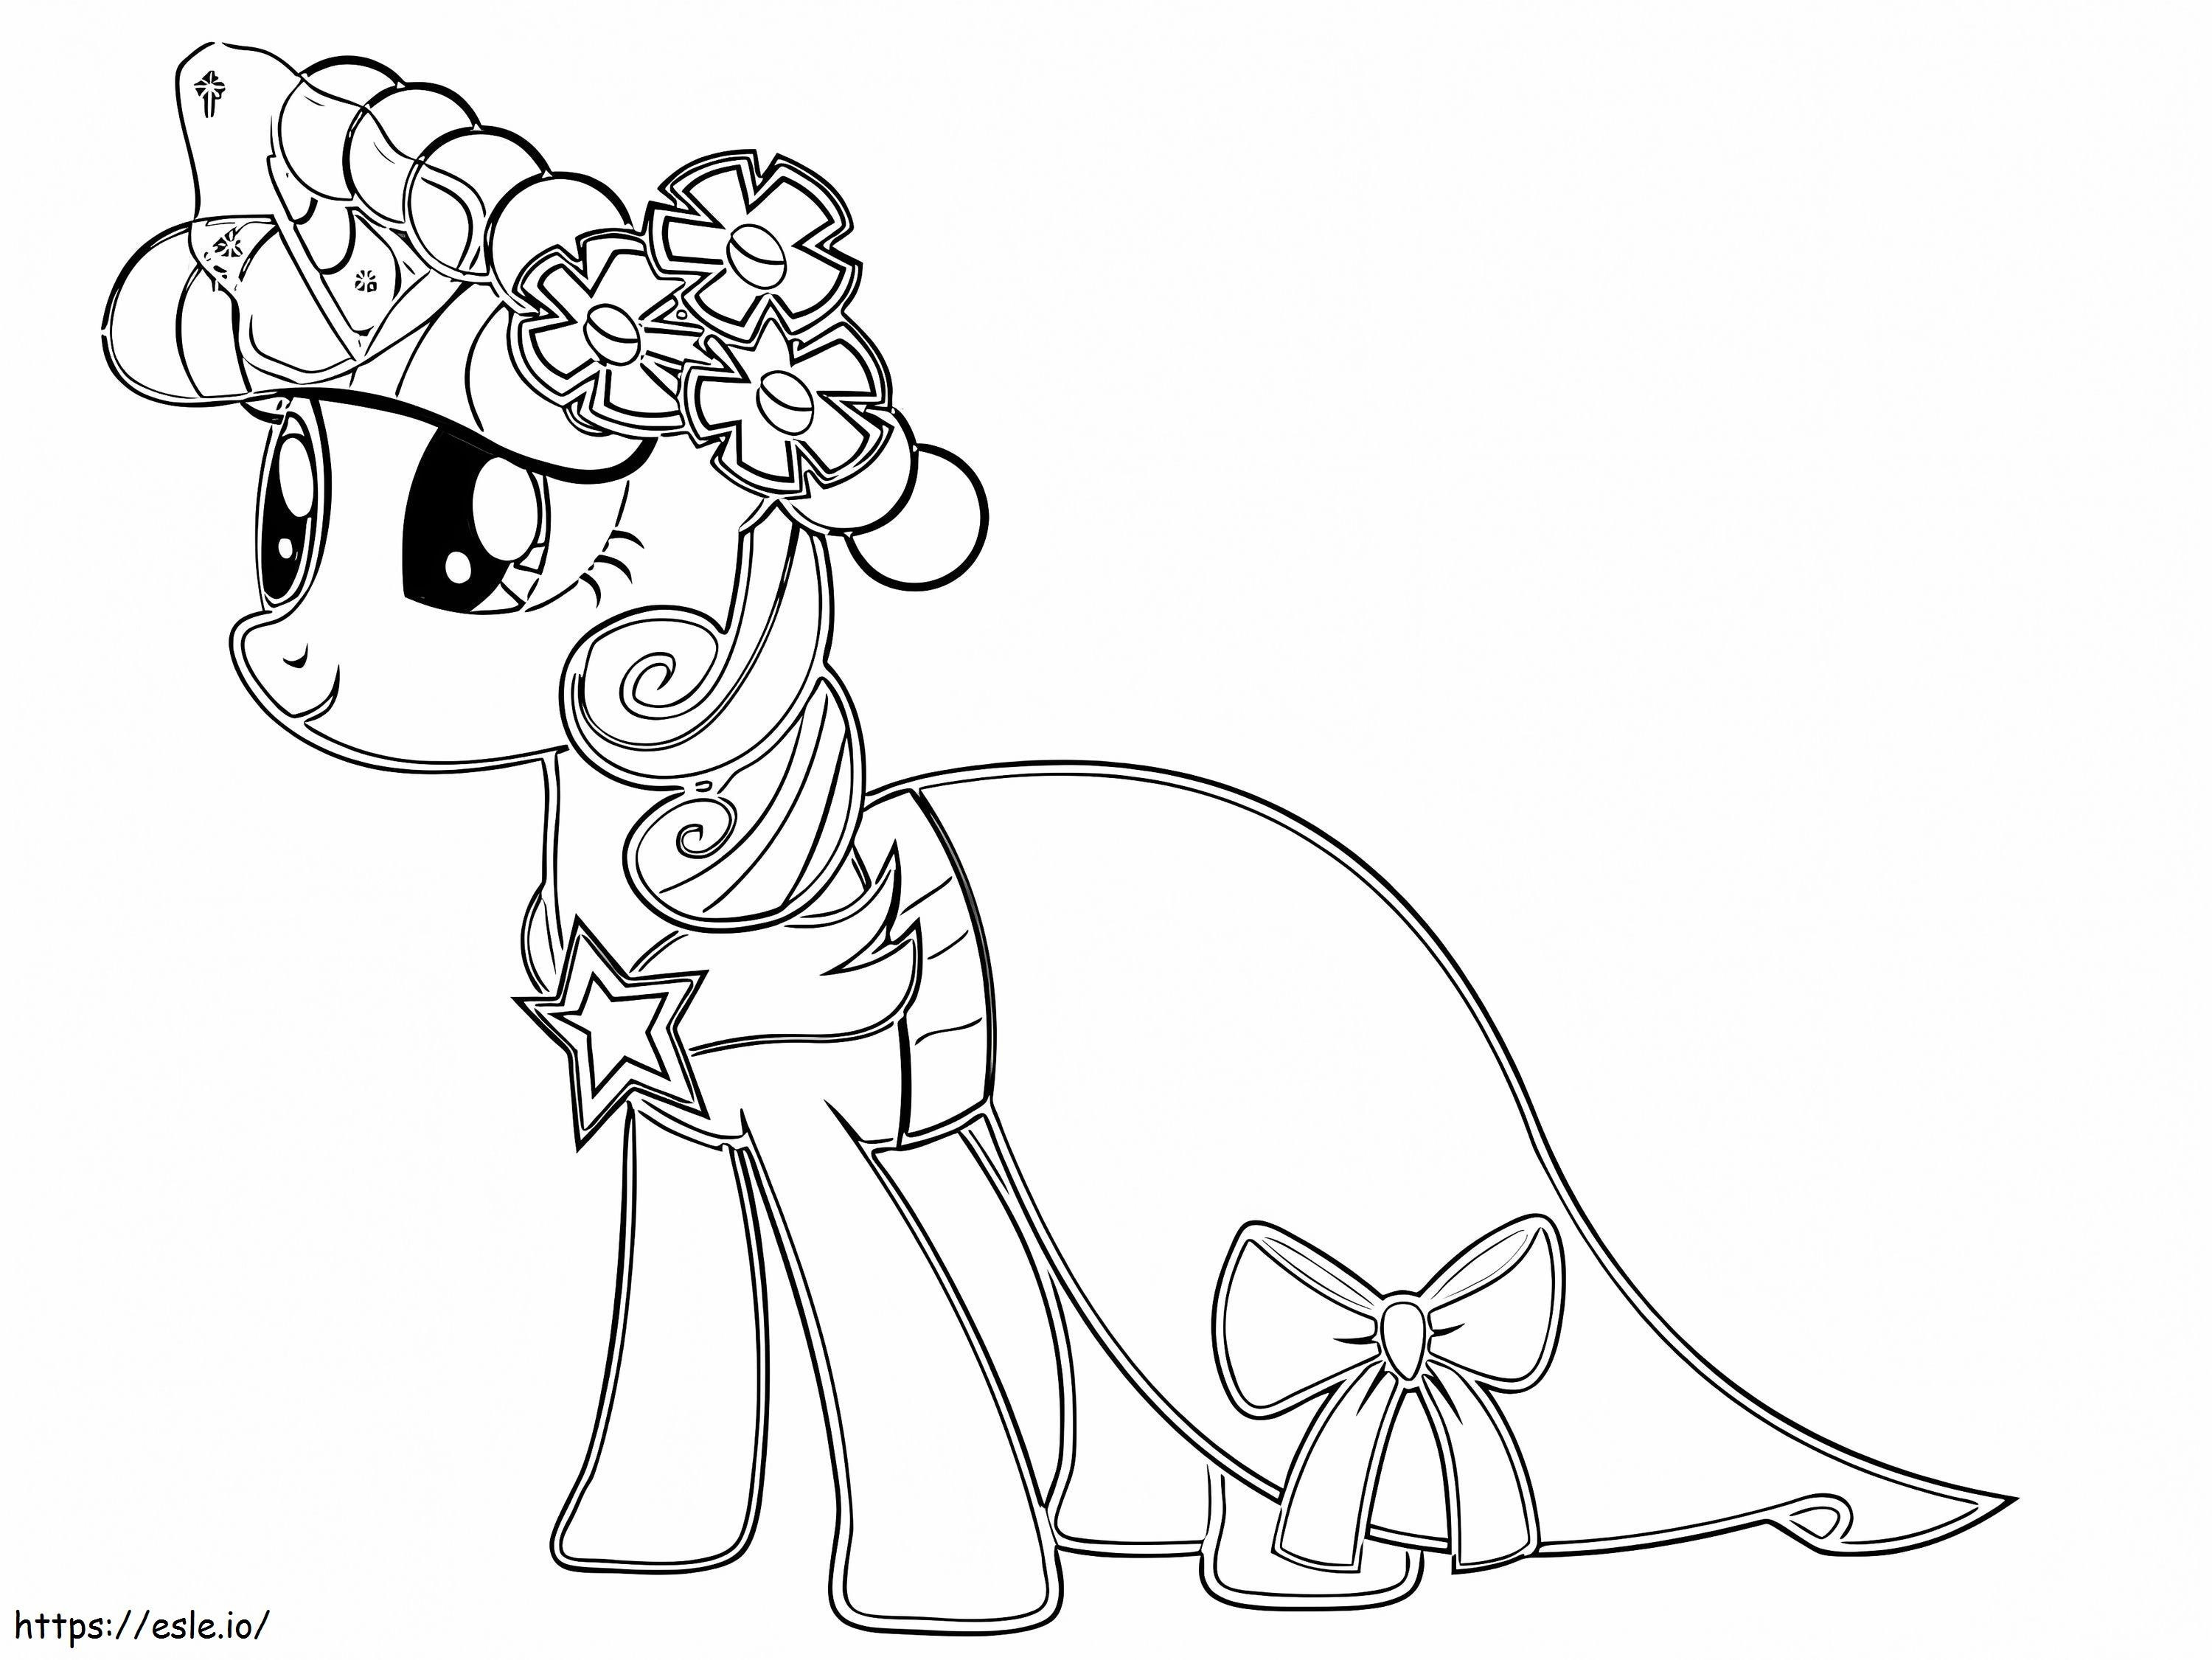 Cute Twilight Sparkle coloring page